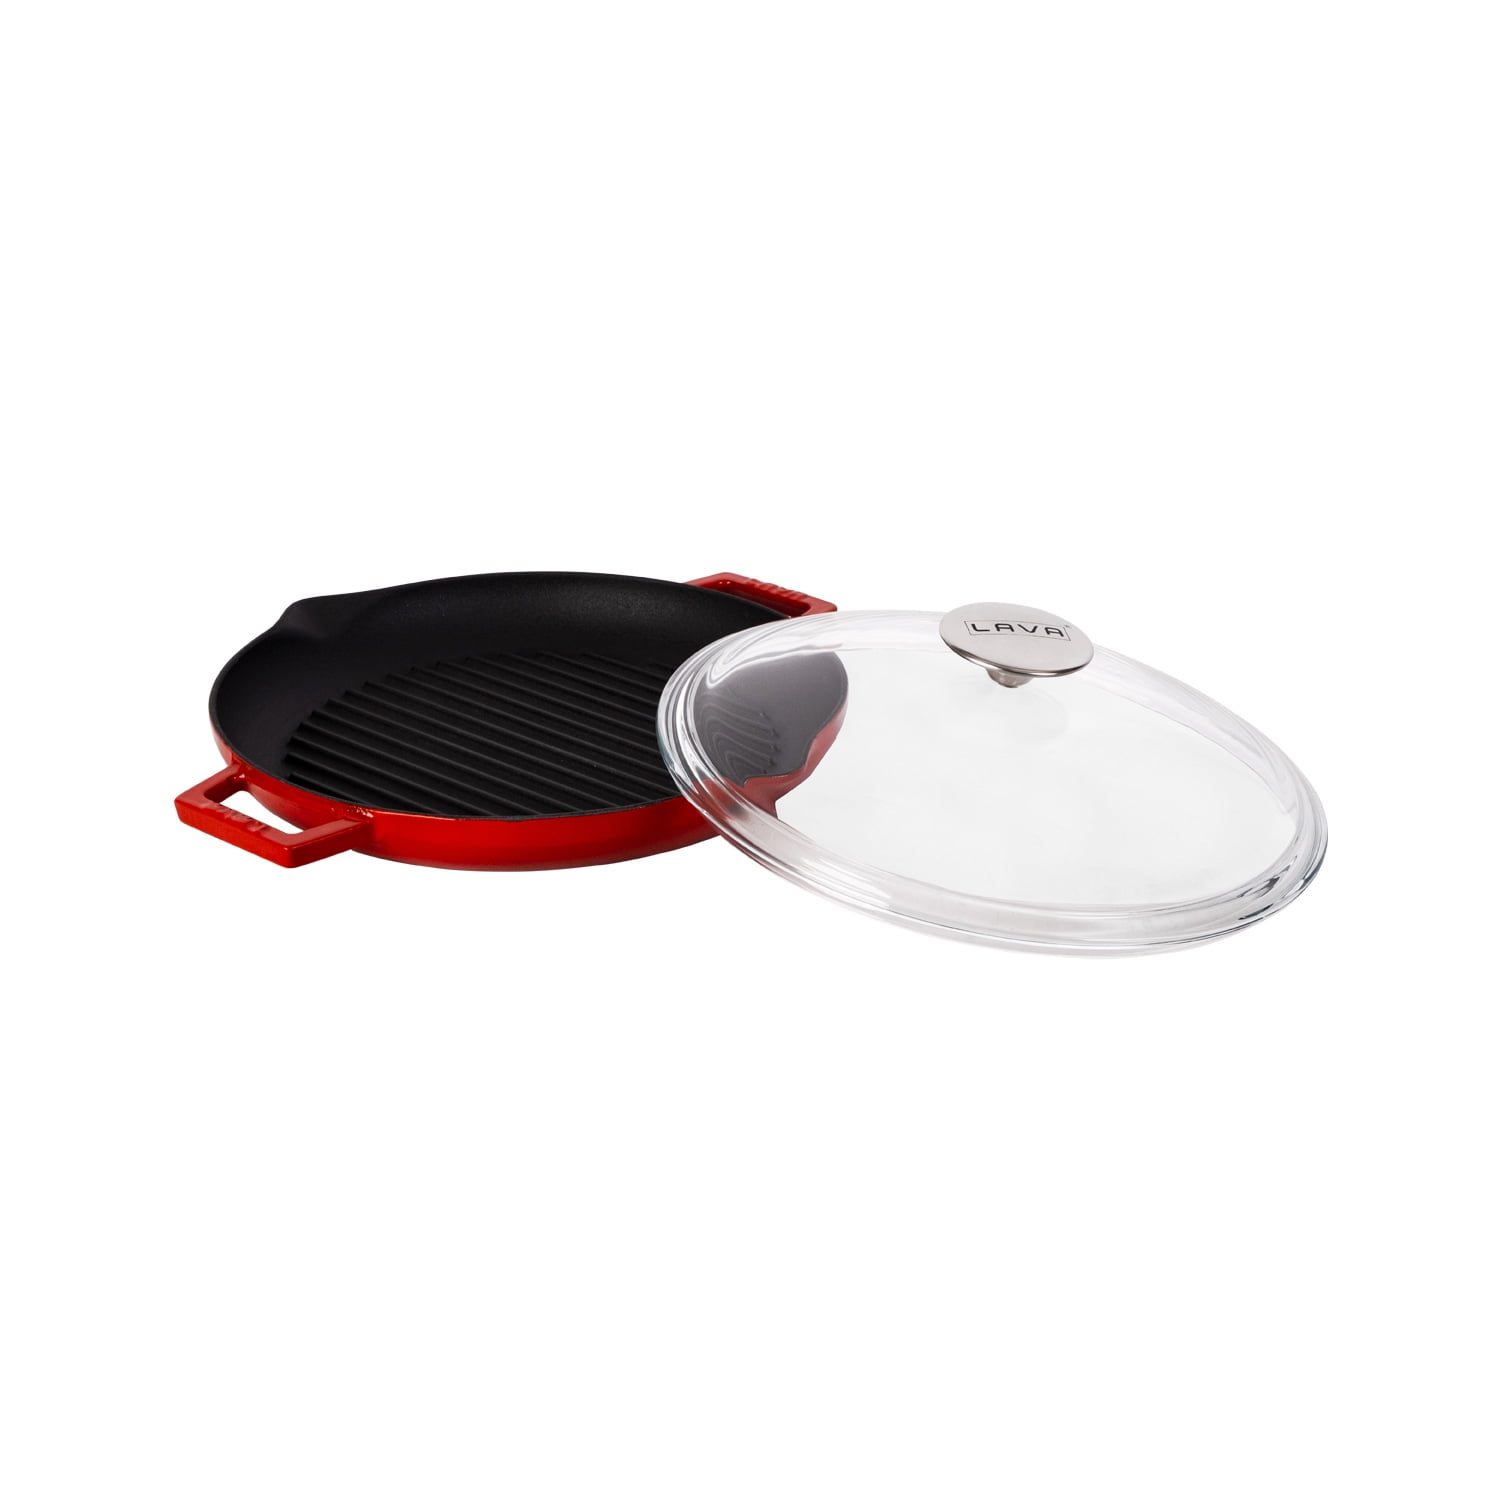 Lava Cast Iron Lava Enameled Cast Iron Grill Pan 12 inch-Round with Pour Spouts Color: Red LV Y STV 30 K0 R